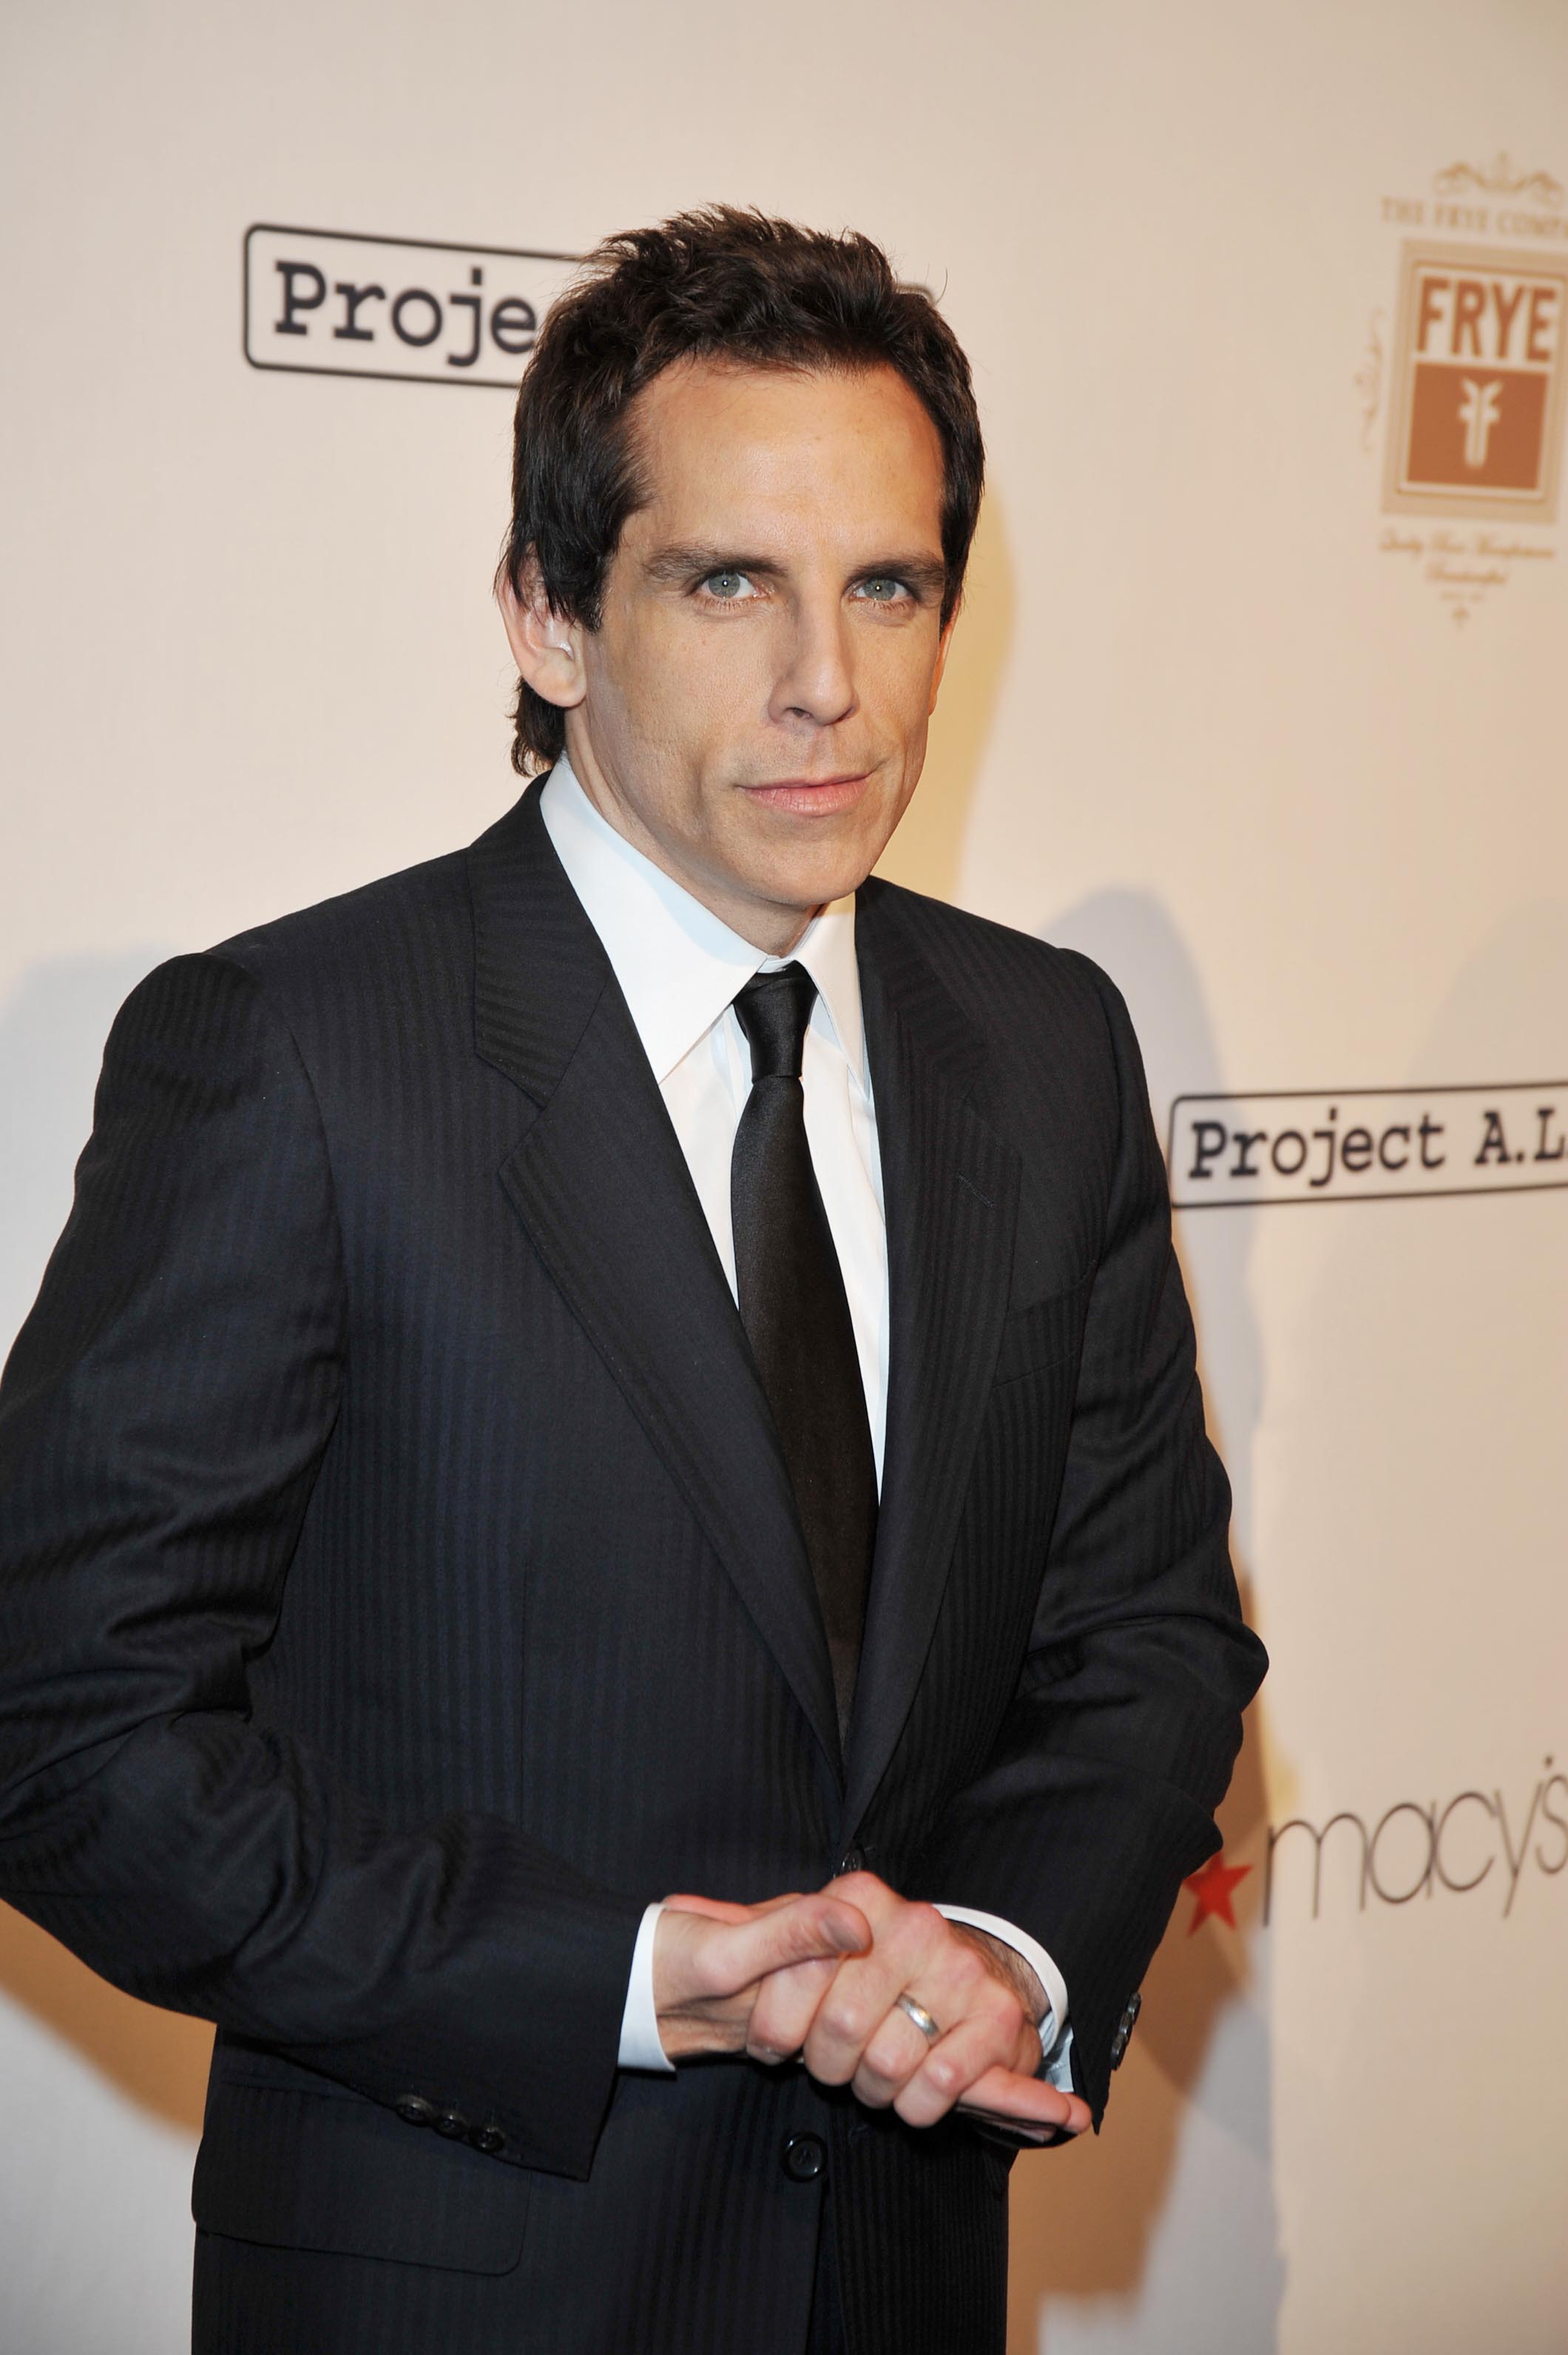 Ben Stiller at the PROJECT ALS "Tomorrow Is Tonight" 11th annual benefit Gala on October 7, 2008 | Source: Getty Images